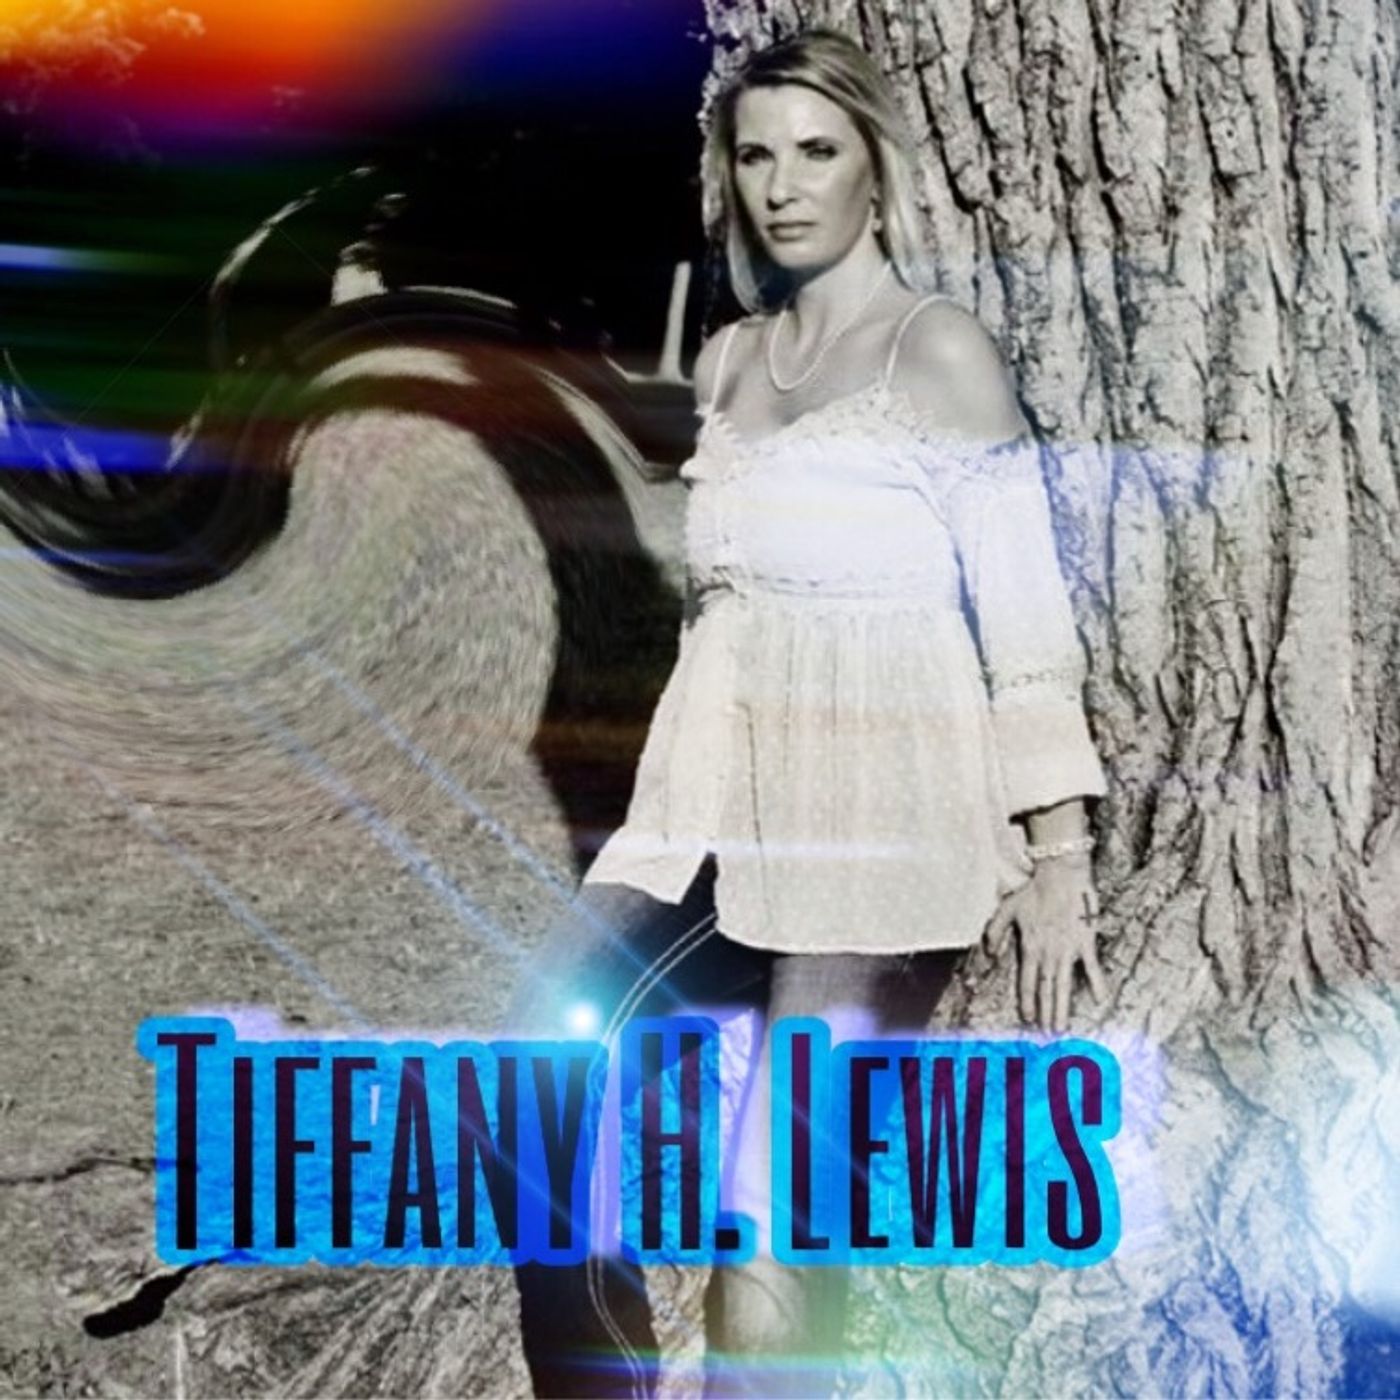 Tiffany H. Lewis: Episode 1 of 2~ *The Heart Feeling* July 7, 2019 _-YouTube channel~ AWAK3N CR3ATOR